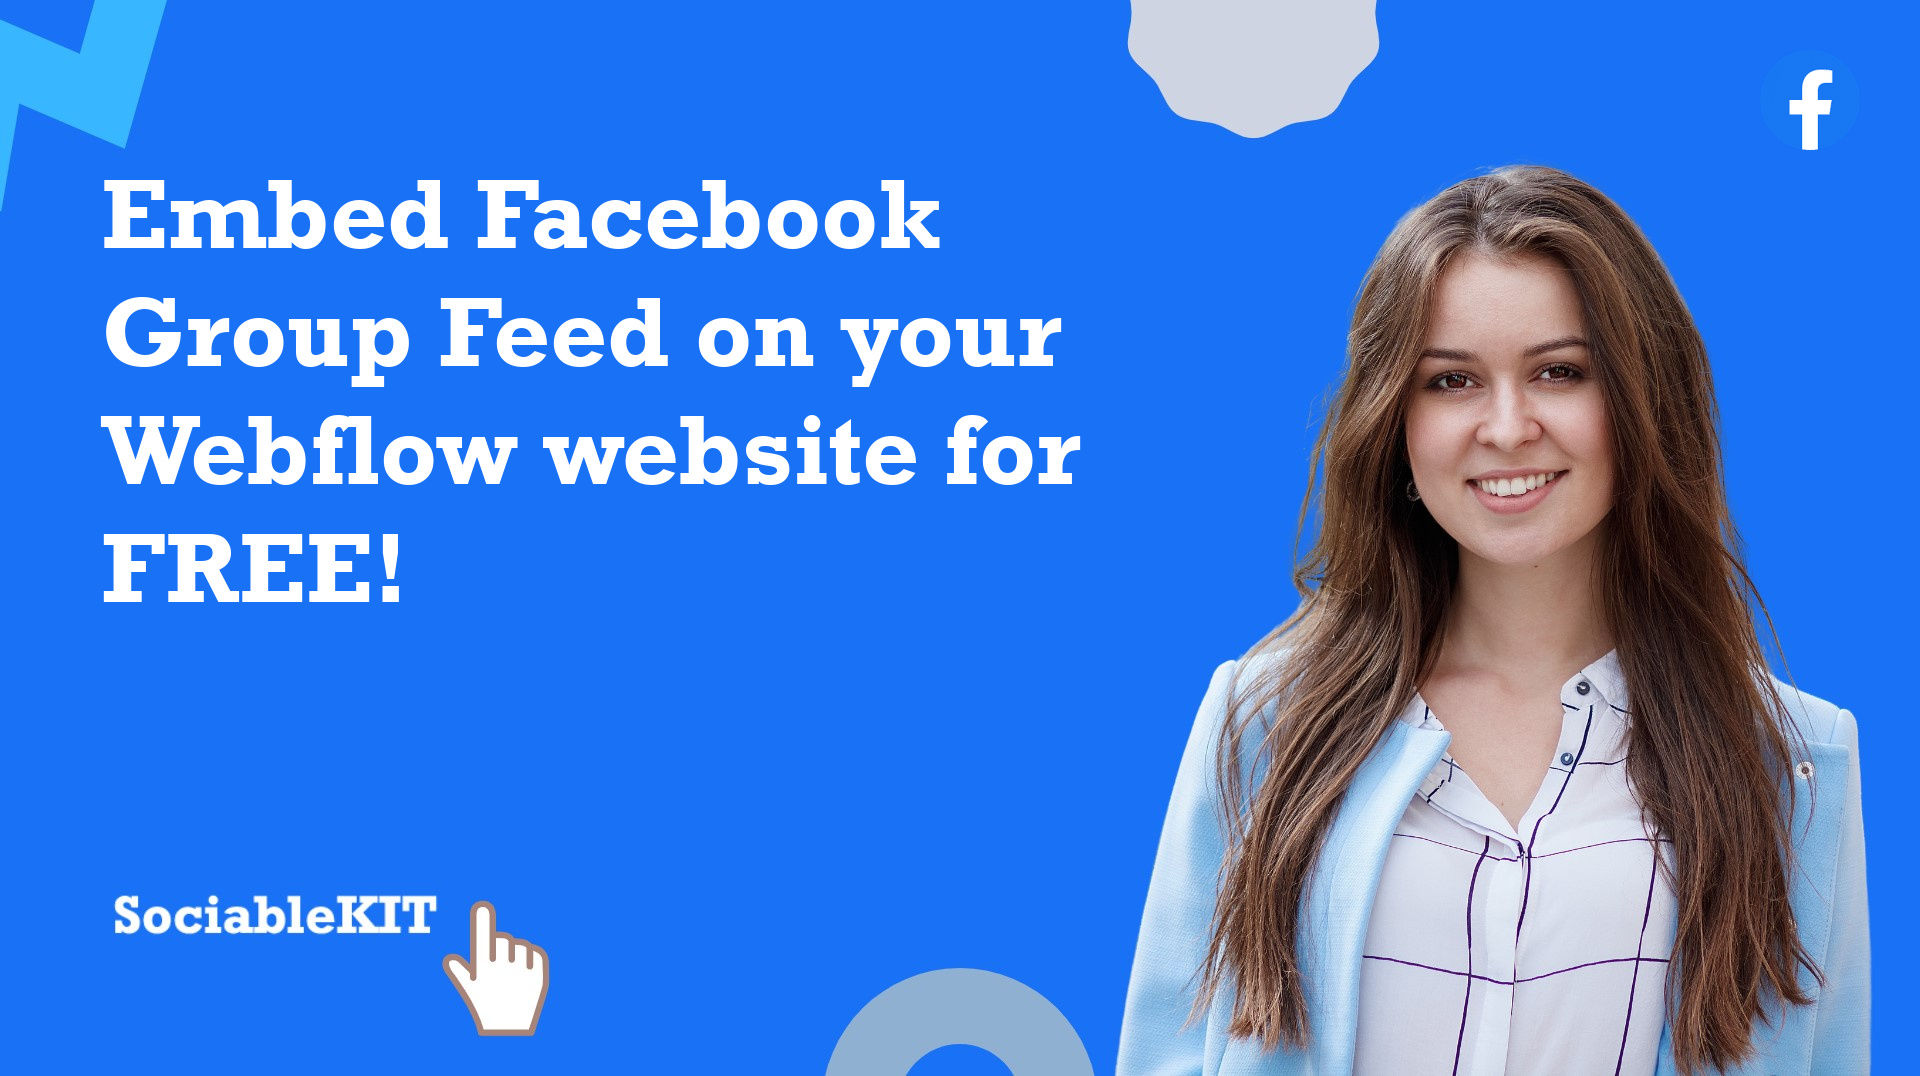 How to embed Facebook Group Feed on your Webflow website for FREE?